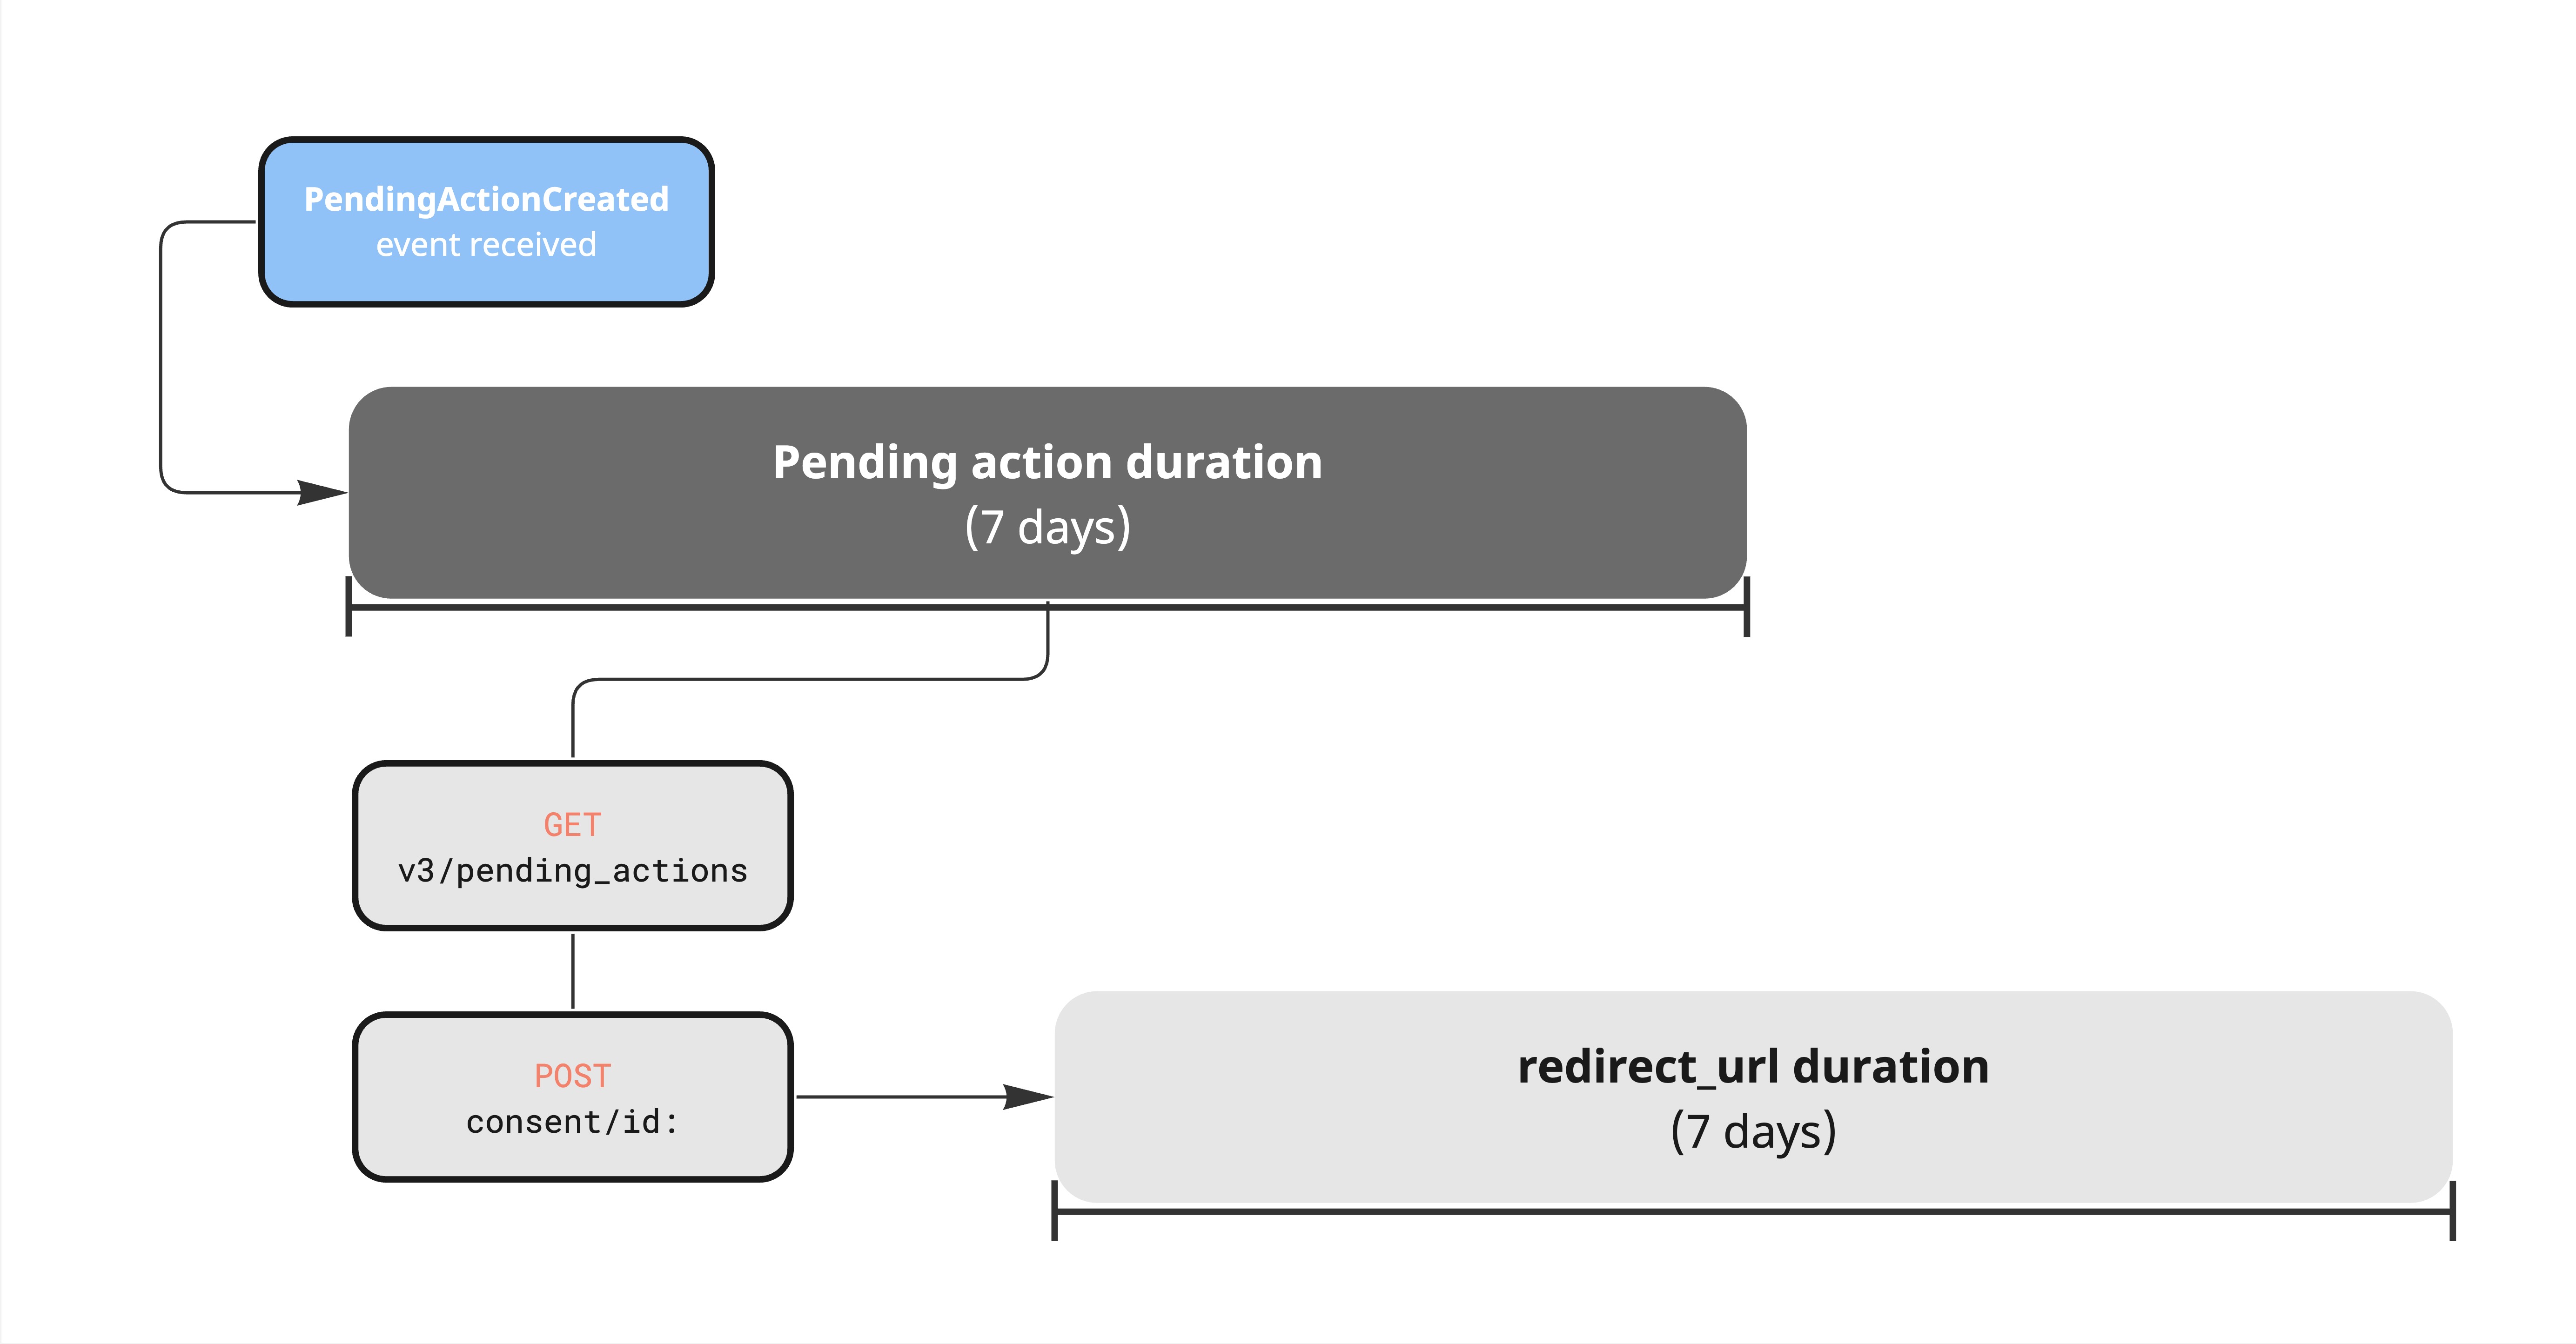 Onboarding pending actions expiration